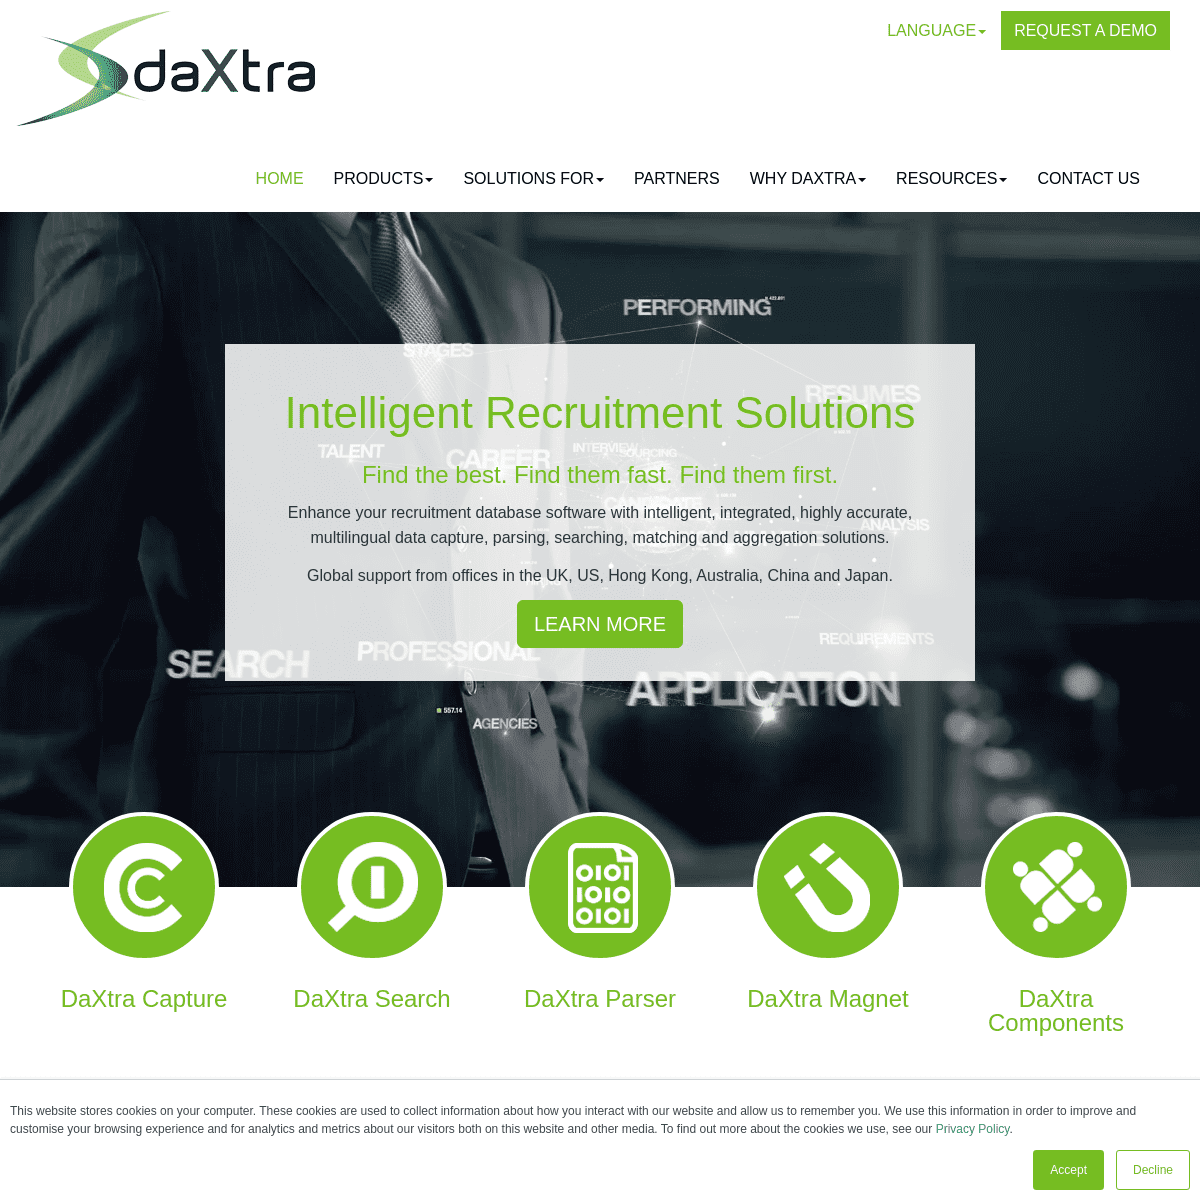 A complete backup of daxtra.com